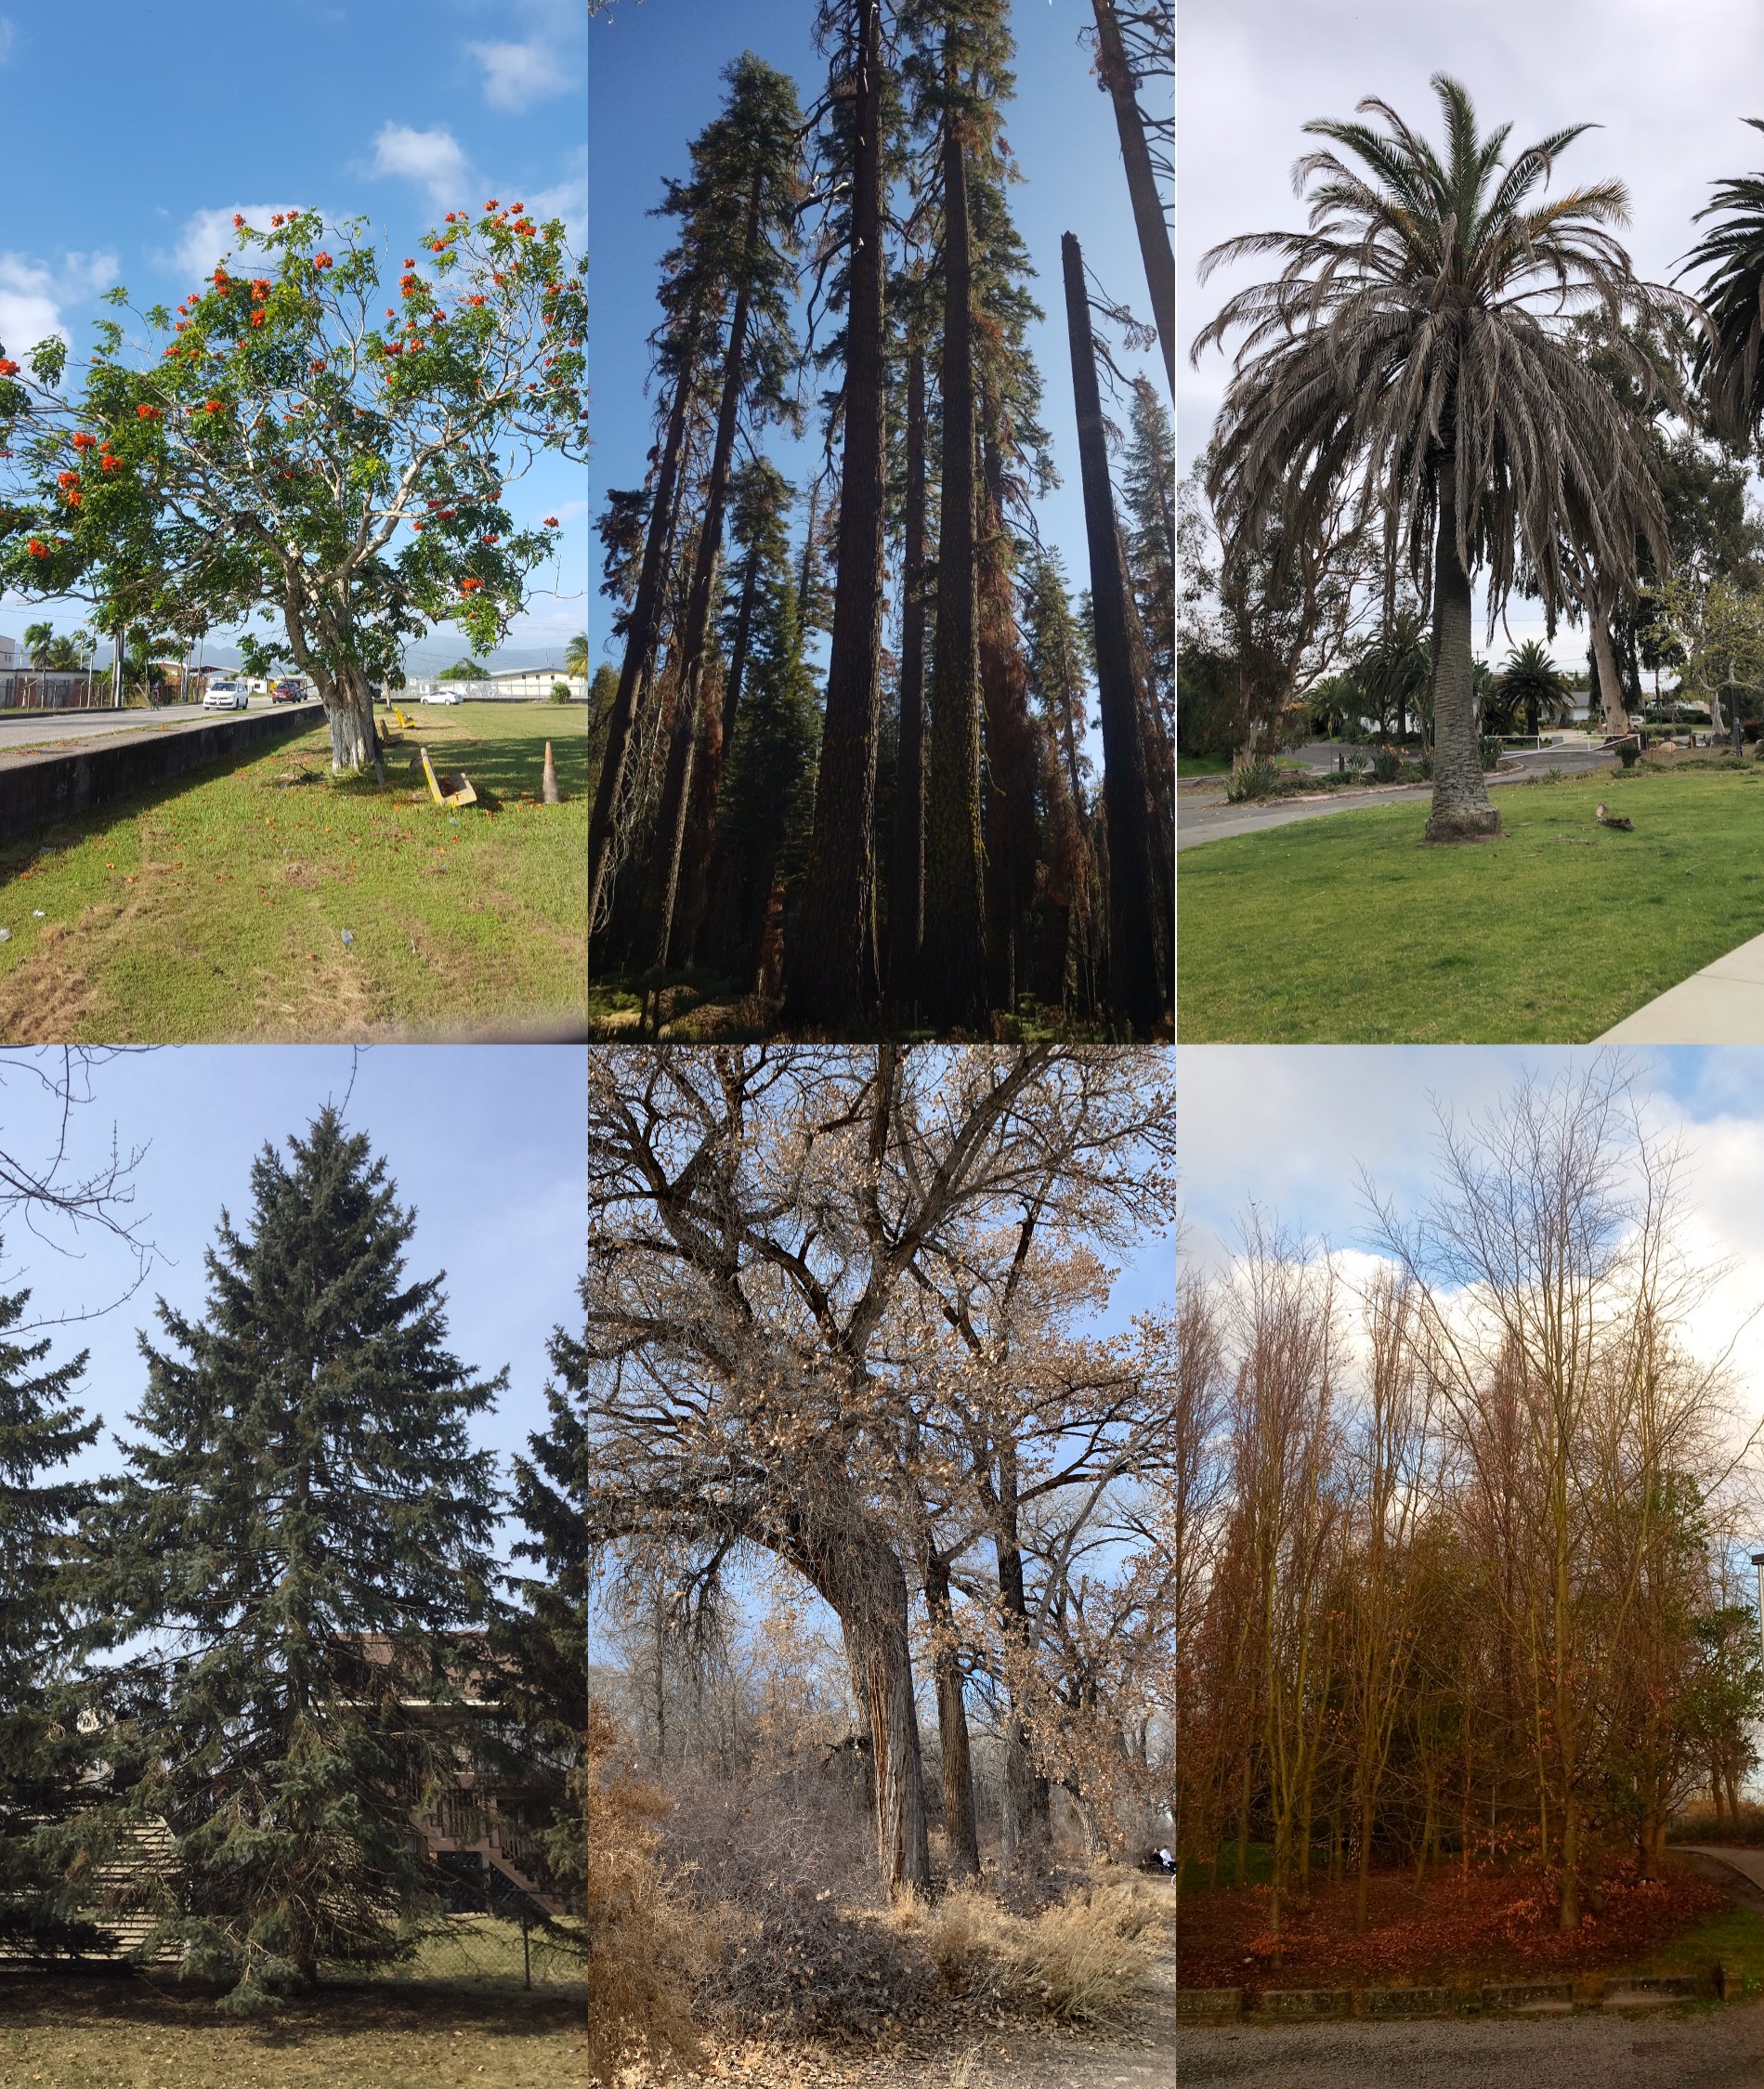 Examples of different types of trees